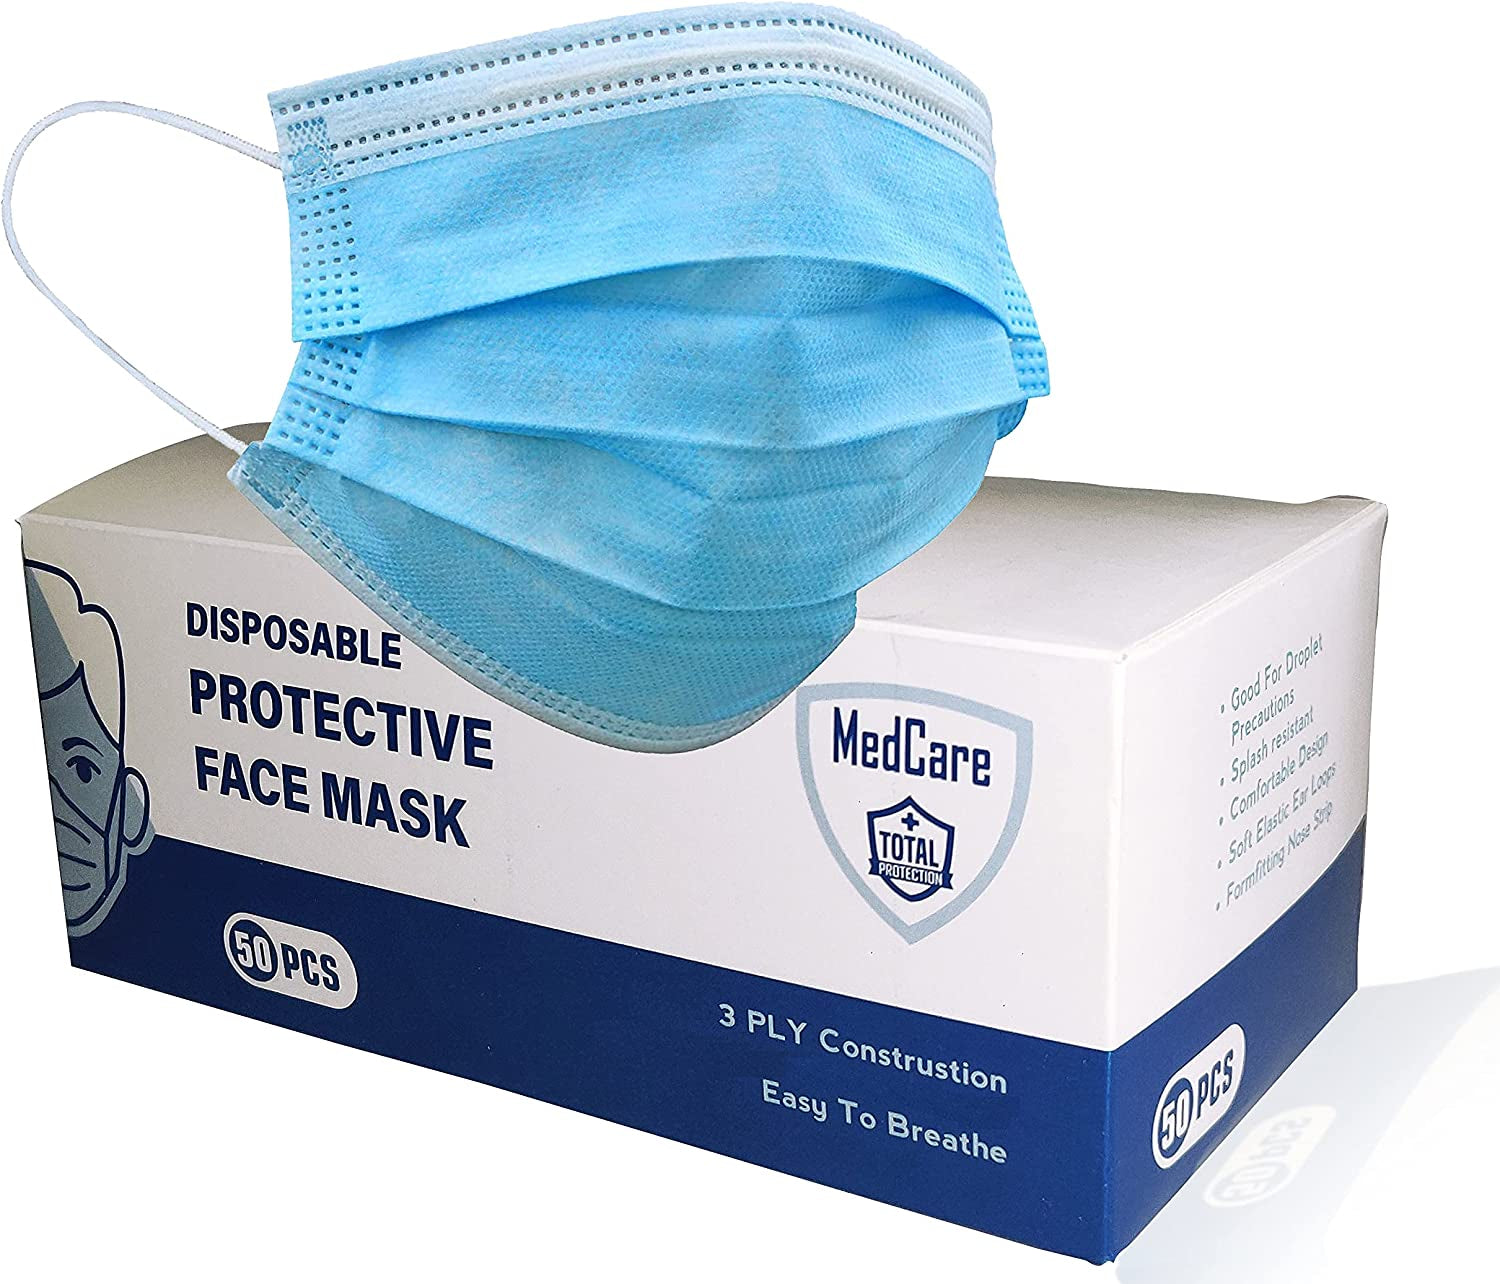 MEDCARE, MEDCARE Face Mask Disposable 50Pcs Box, 3 Layers Breathable Earlooped (Plastic Seal), Shipped from Australia